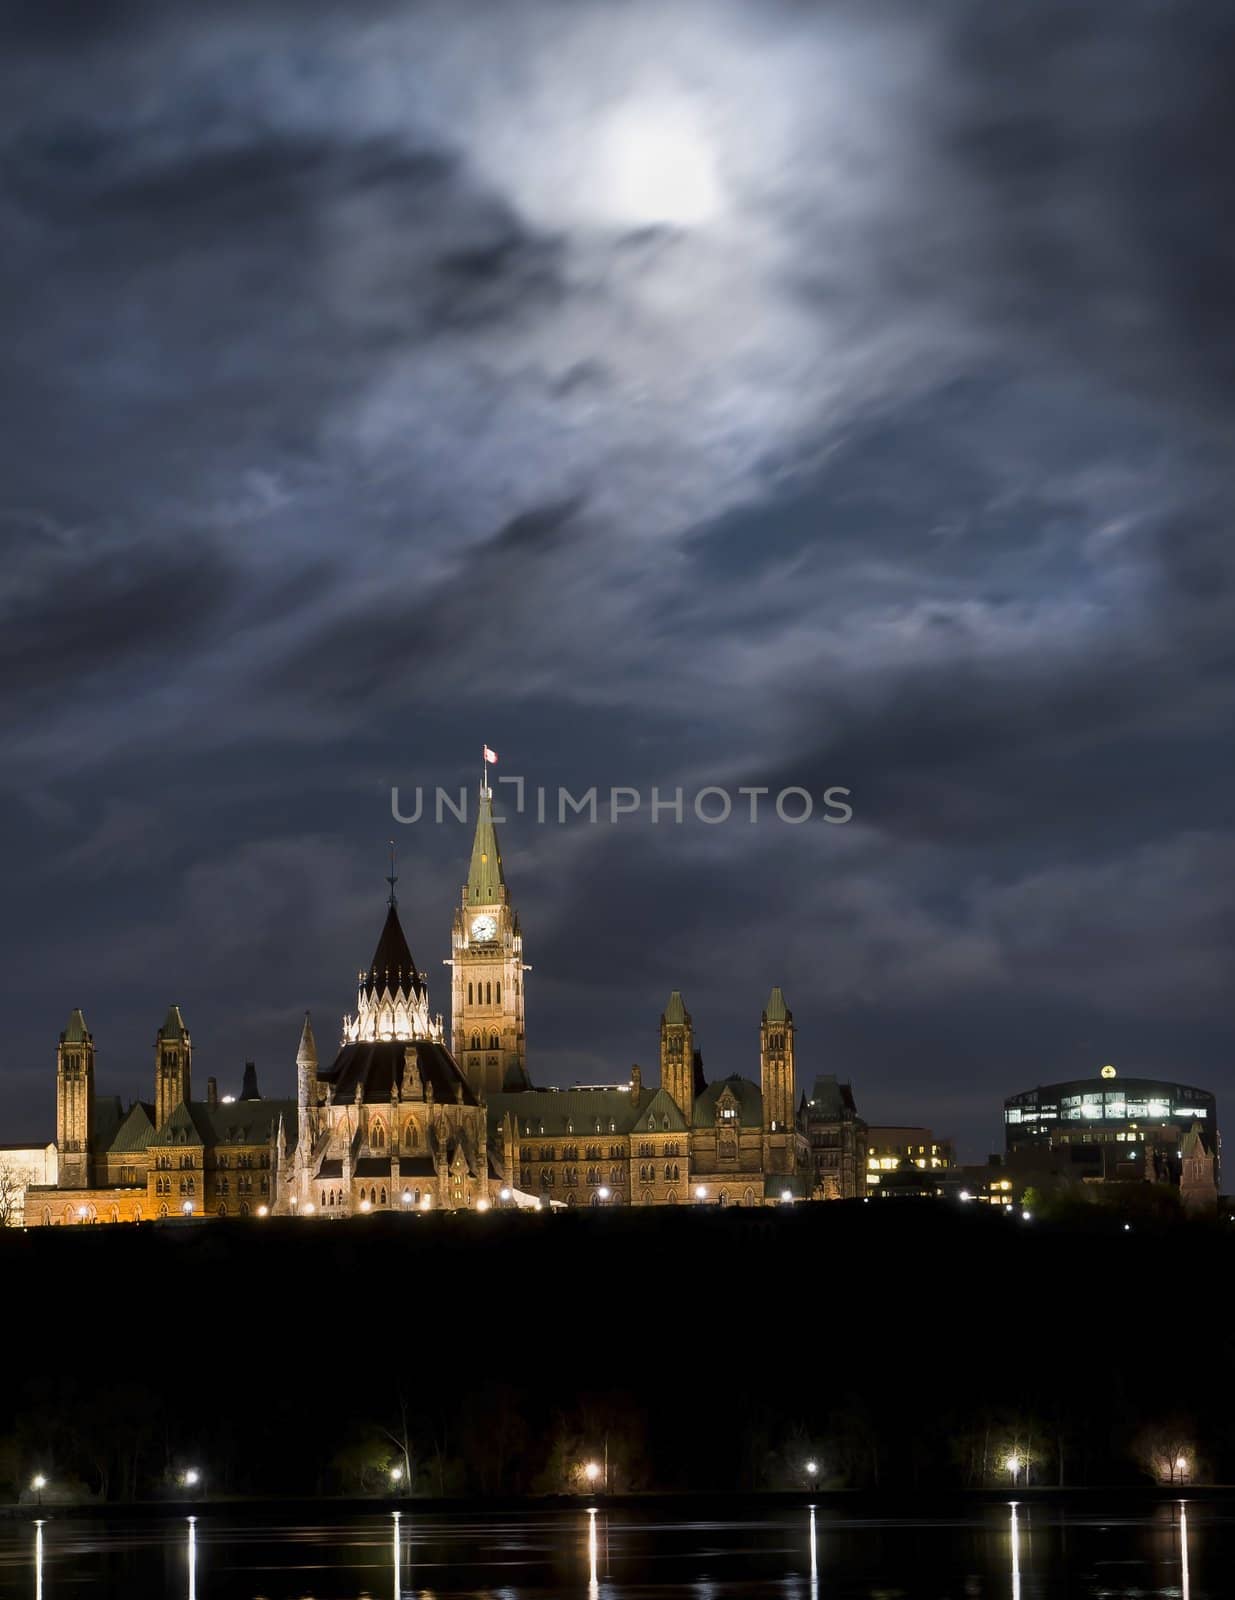 May 5, 2012: Super moon over the canadian Parliament at night.